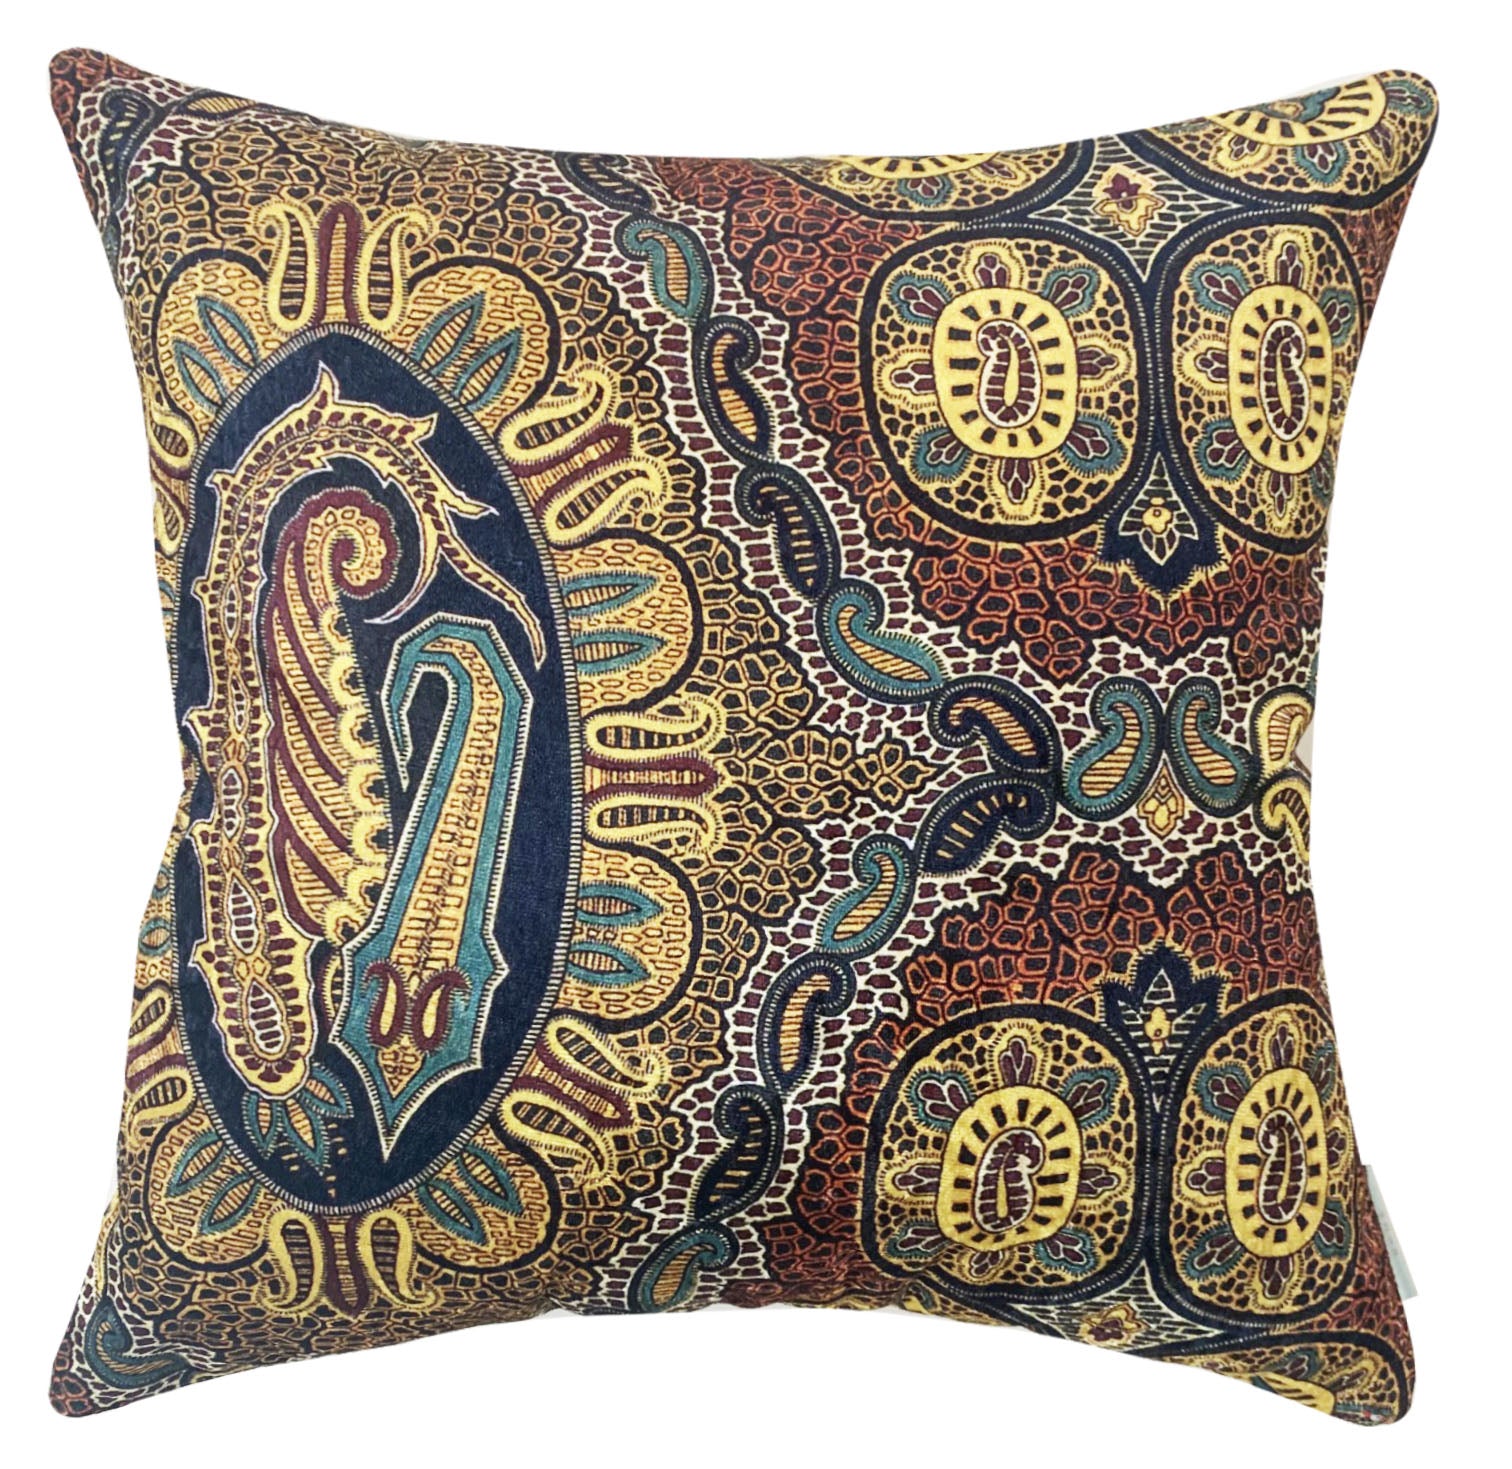 Vintage Paisley Chic Designer Fabric Cushion Cover